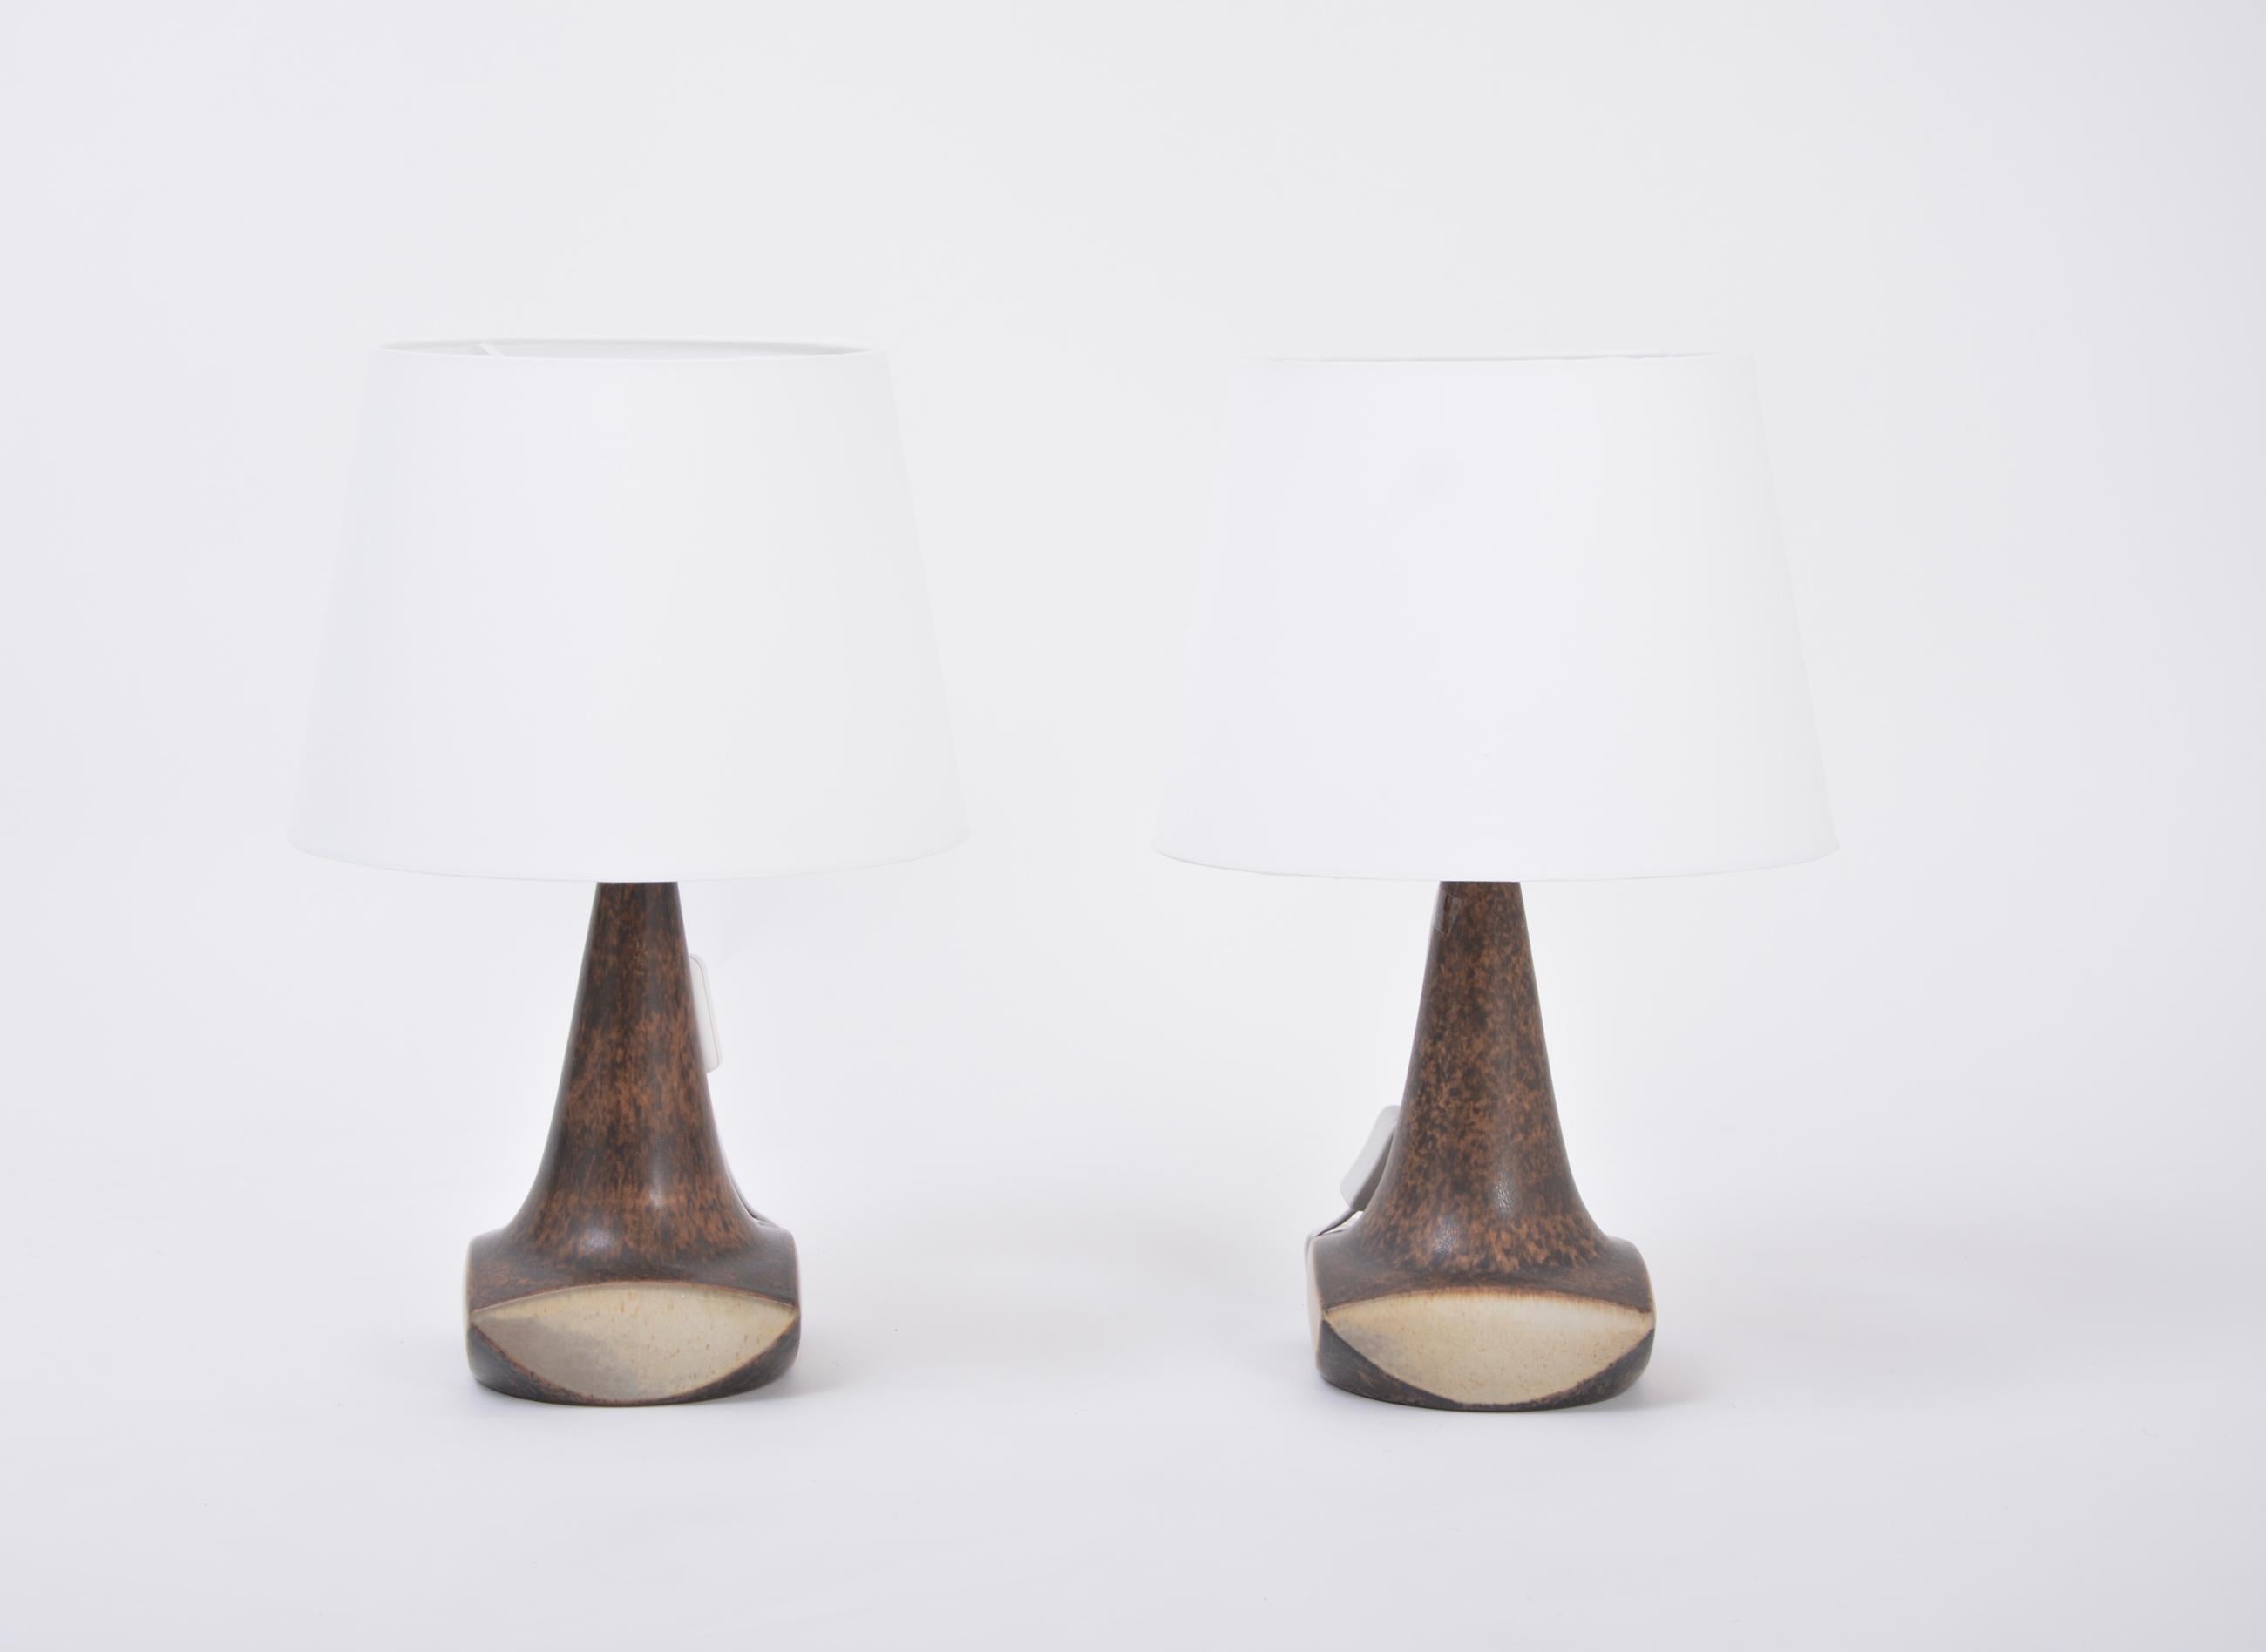 20th Century Pair of Danish Midcentury Table Lamps by Marianne Starck for Michael Andersen